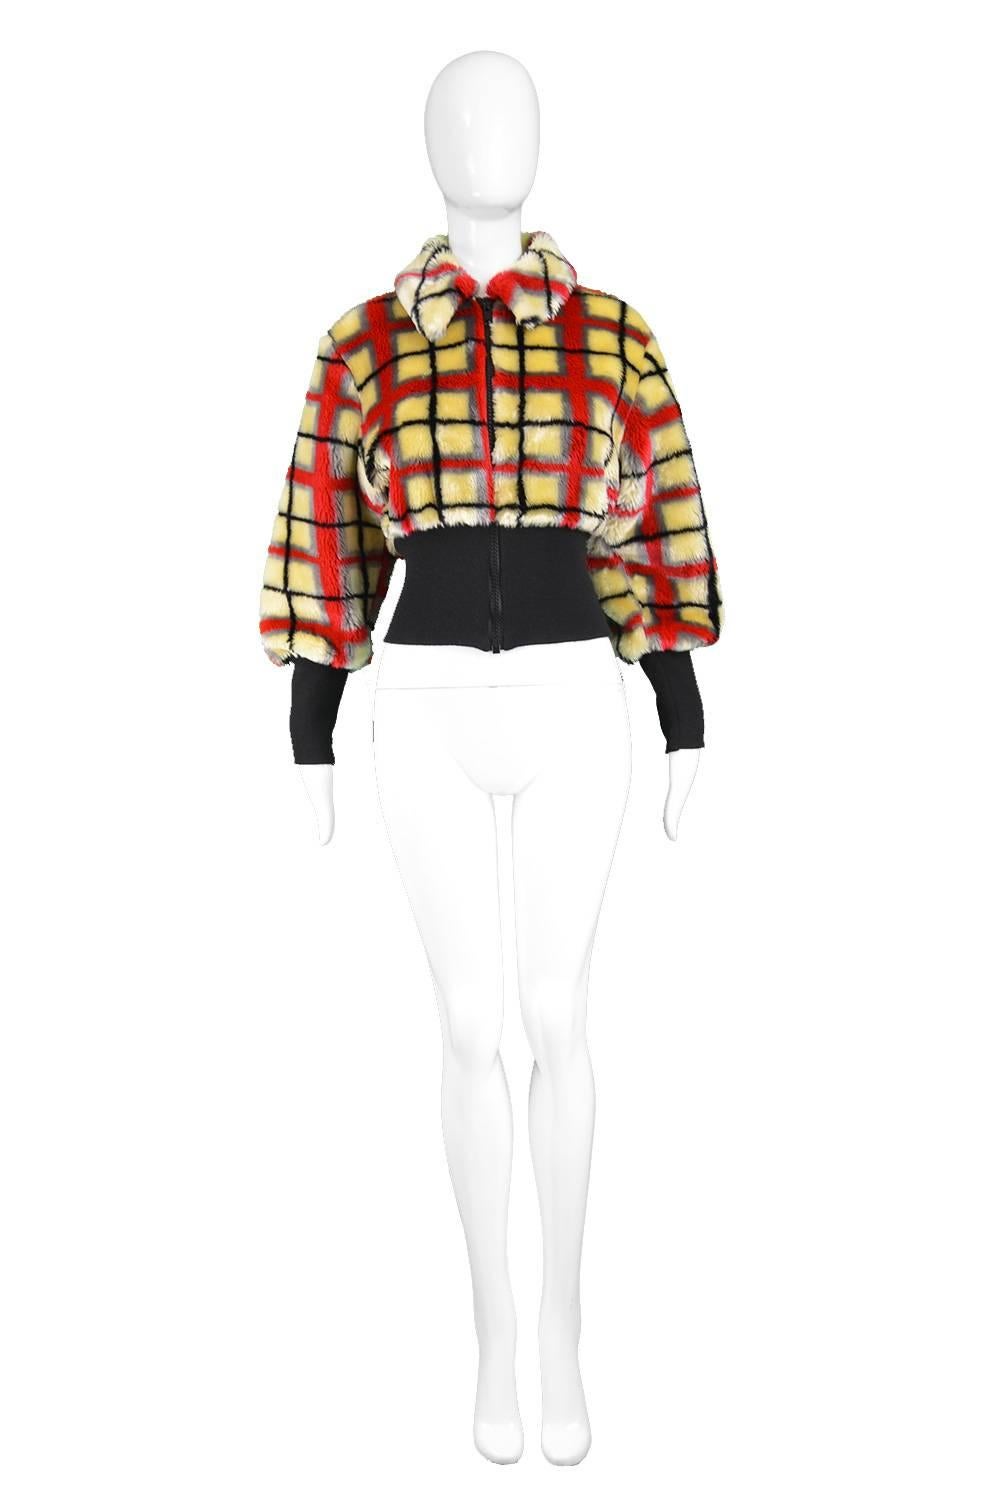 Jean Paul Gaultier Vintage Light Yellow & Red Checked Fake Fur Jacket, 1990s

Estimated Size: Women's Small
Bust - Up to 36” / 91cm (please leave a couple of inches room for movement)
Waist - Stretches from 28-30” / 71-76cm
Length (Shoulder to Hem)